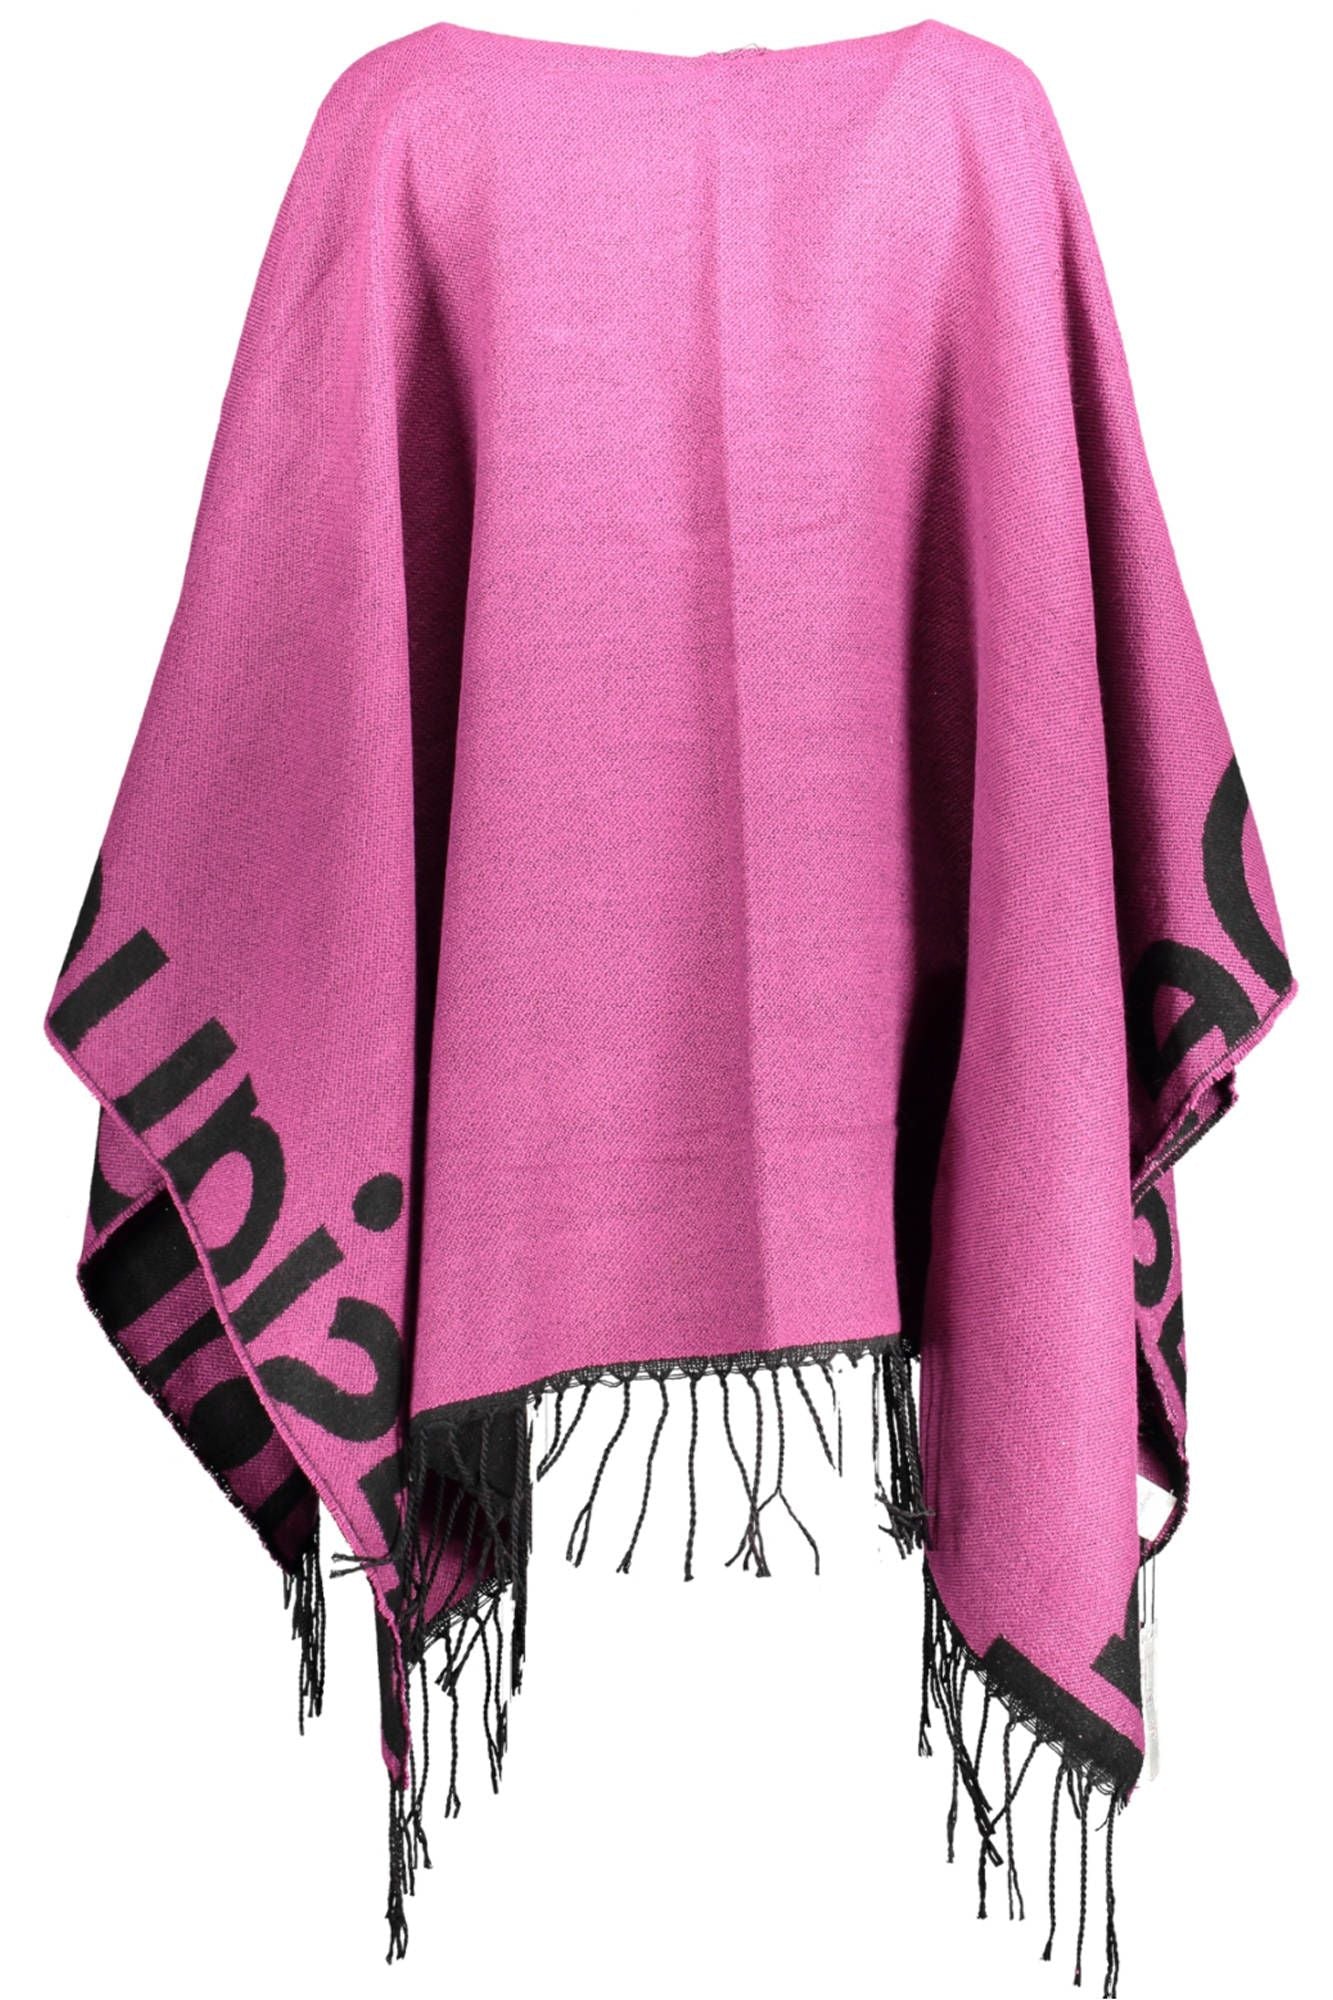 Desigual Chic Purple Poncho with Contrasting Details